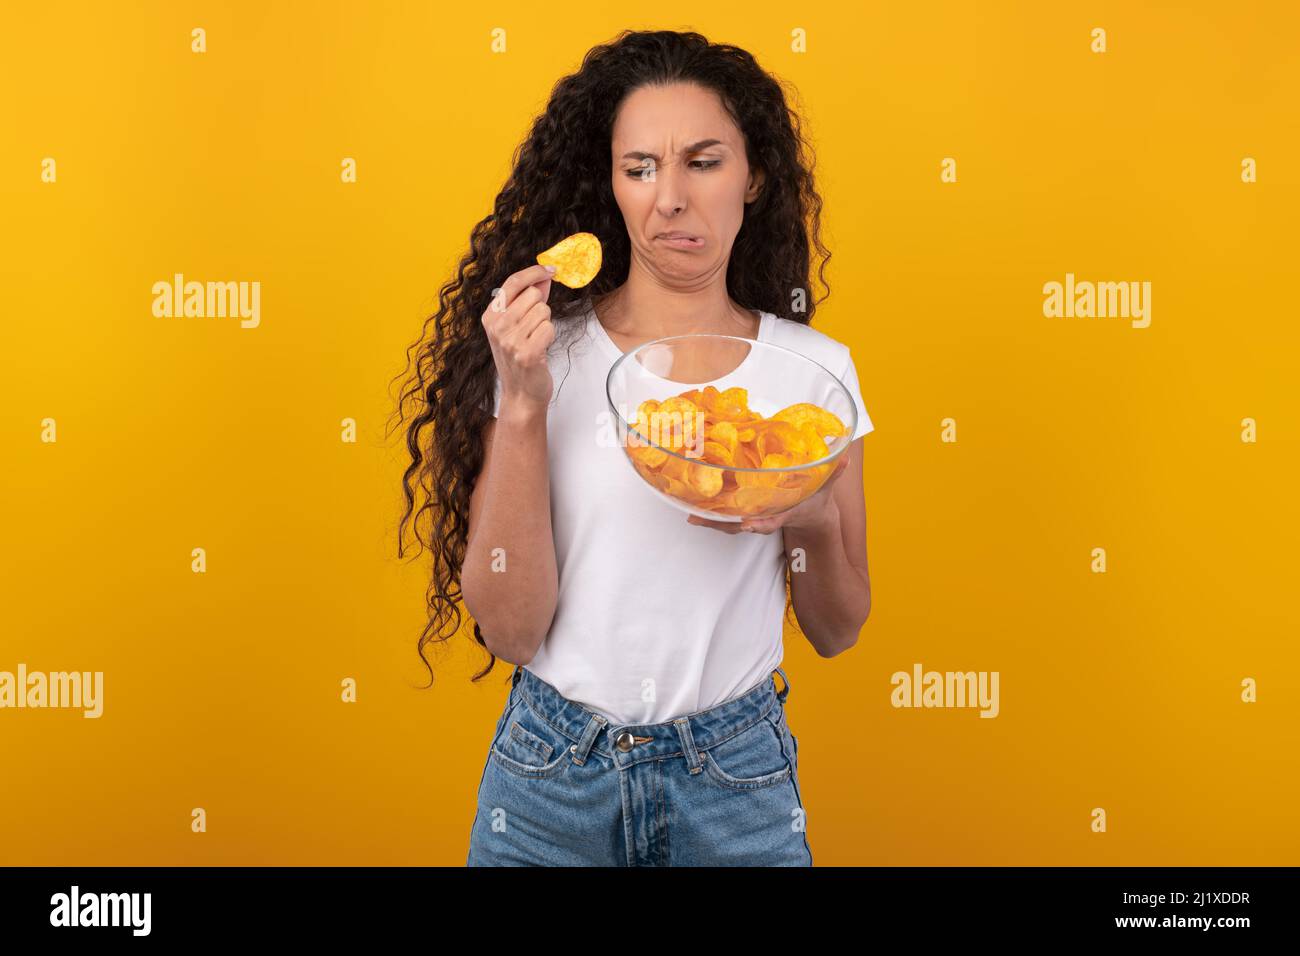 Confused Young Lady Eating Unsavory Potato Crisps Stock Photo